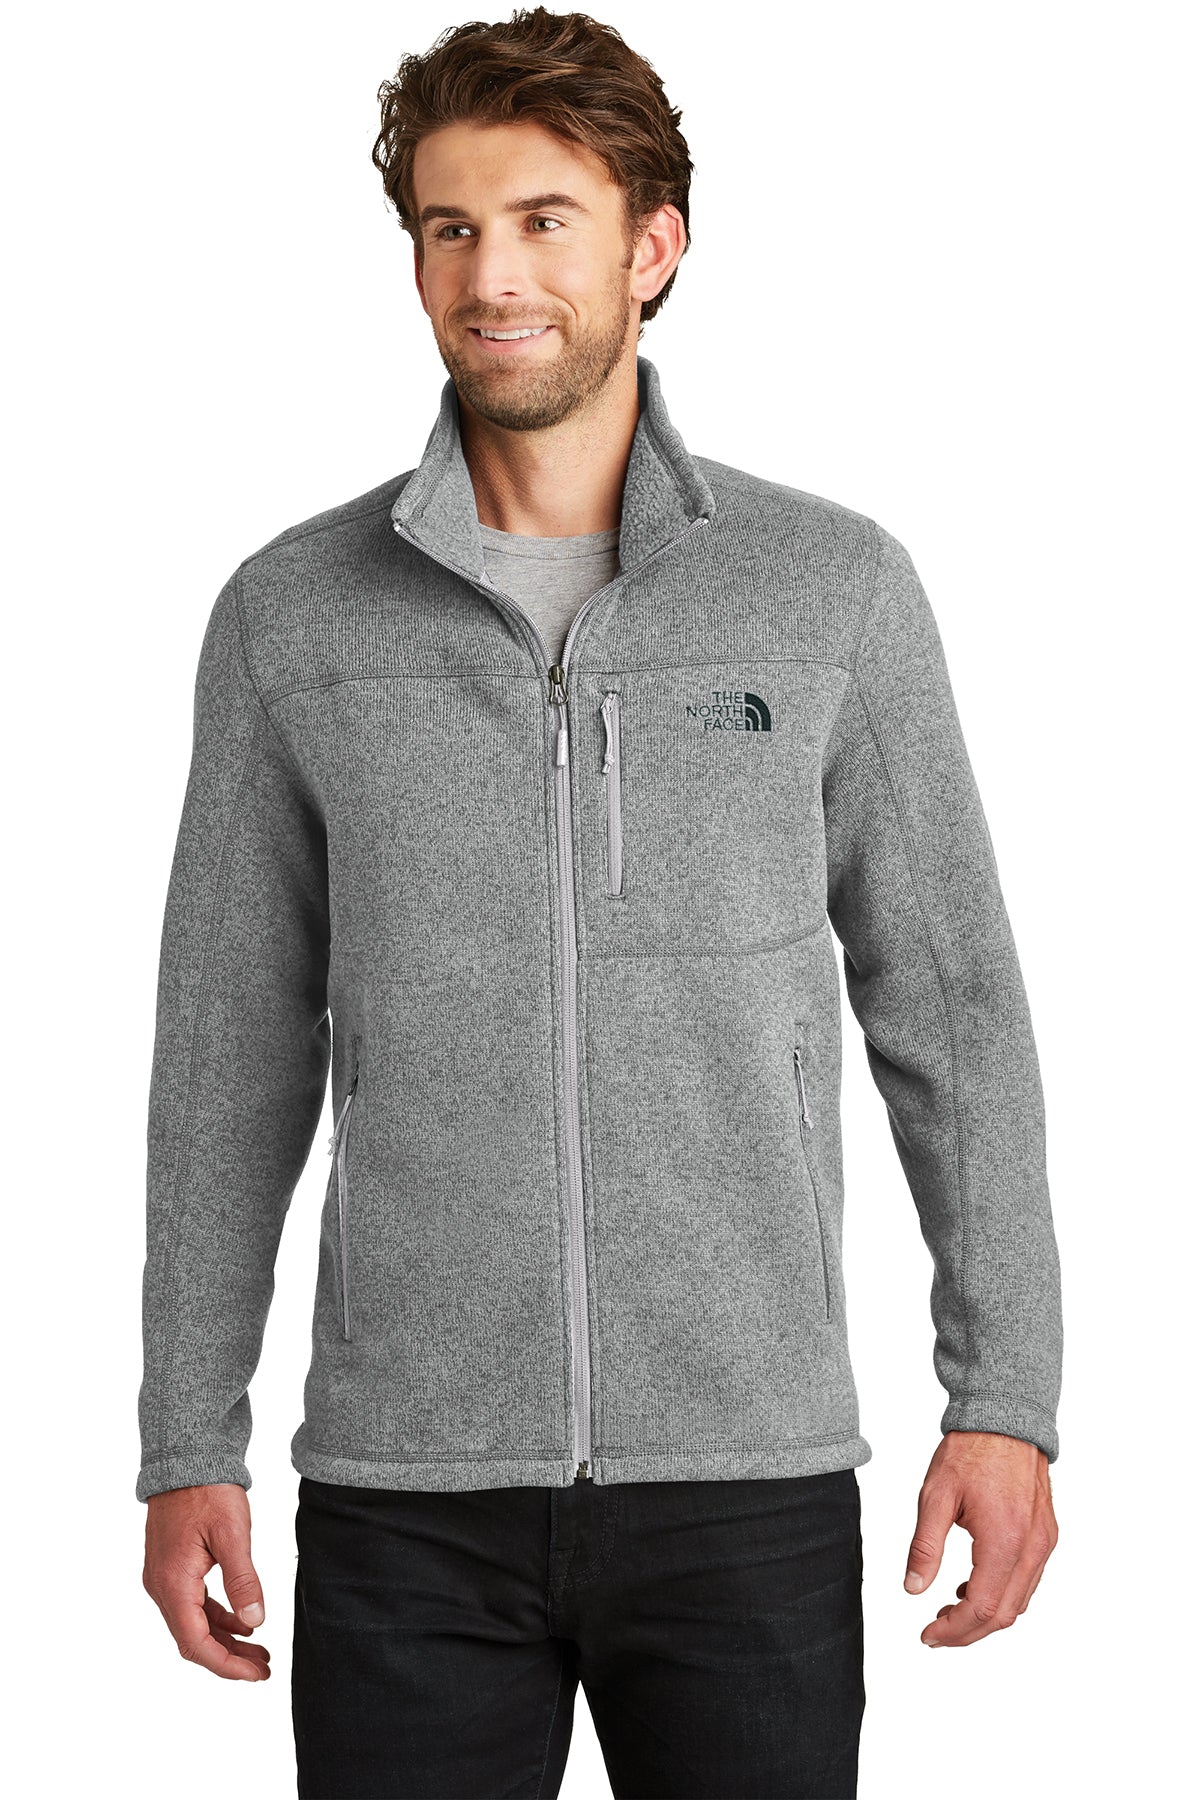 The North Face Sweater Fleece Jacket-3